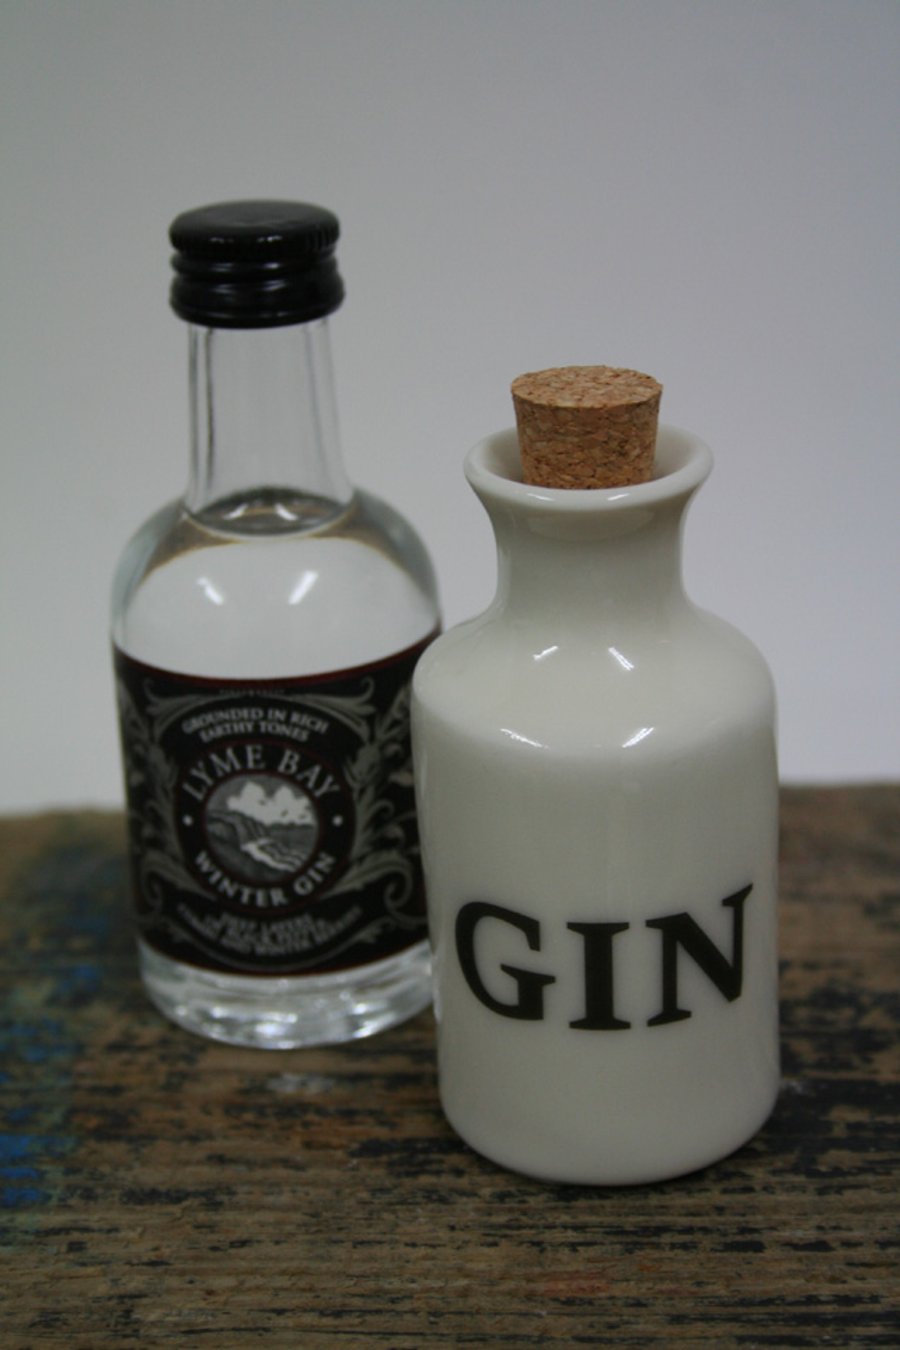 Small porcelain bottle with gin wording